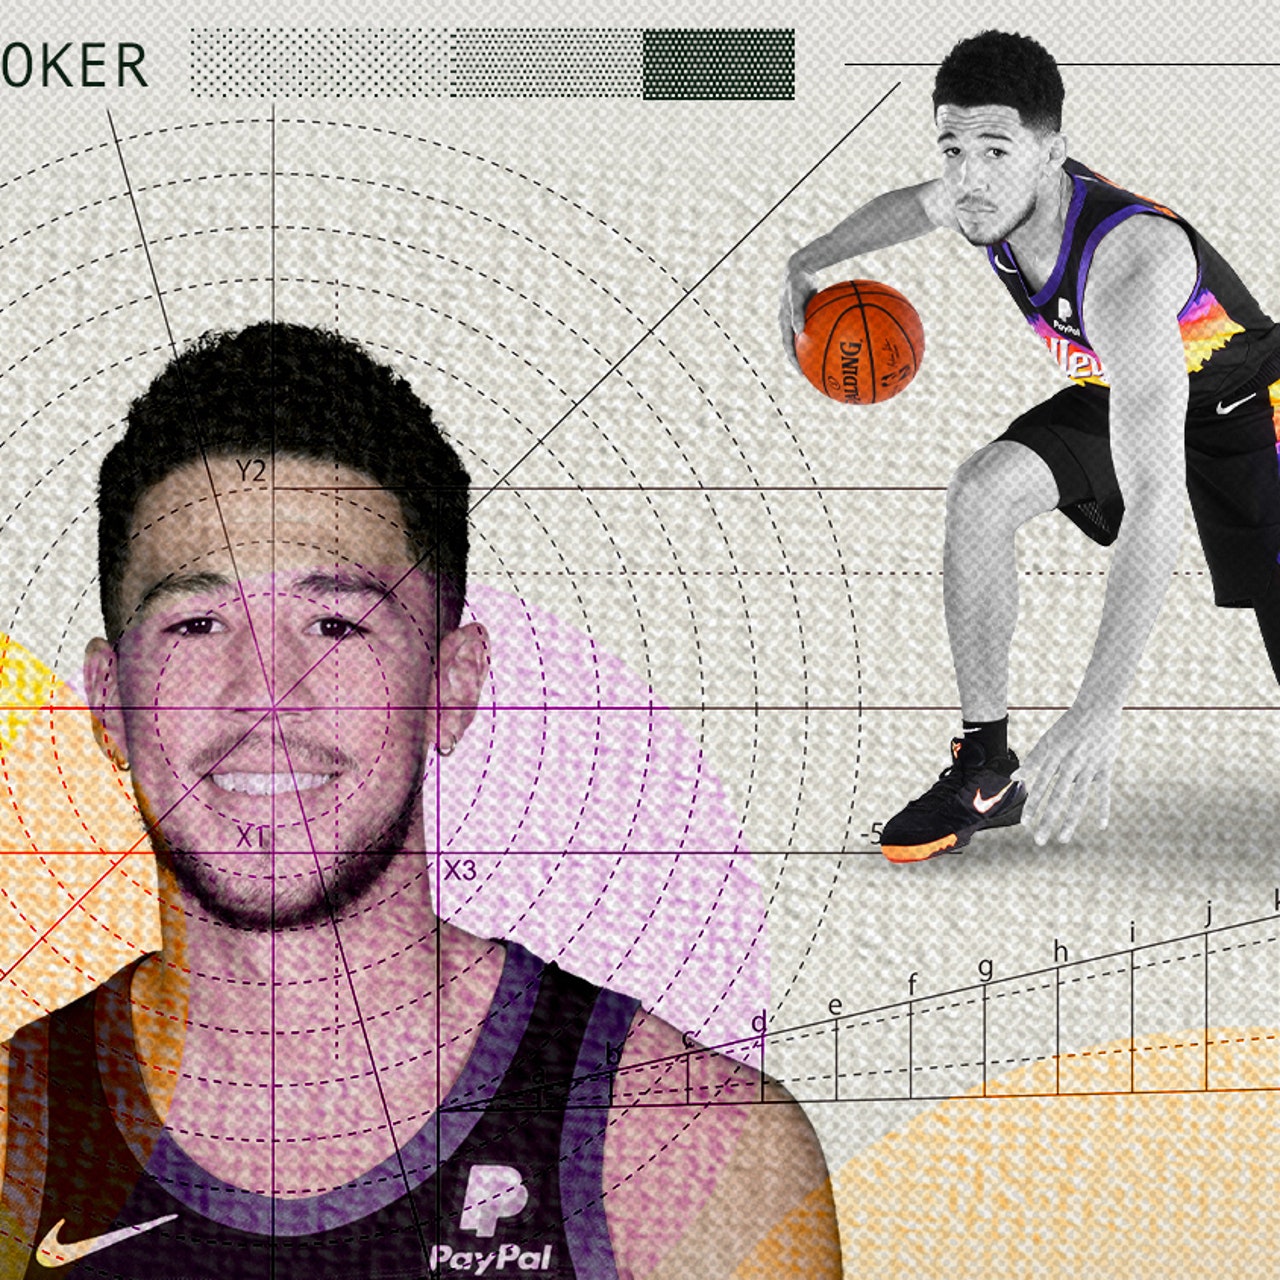 What if the Utah Jazz had drafted Devin Booker in 2015?